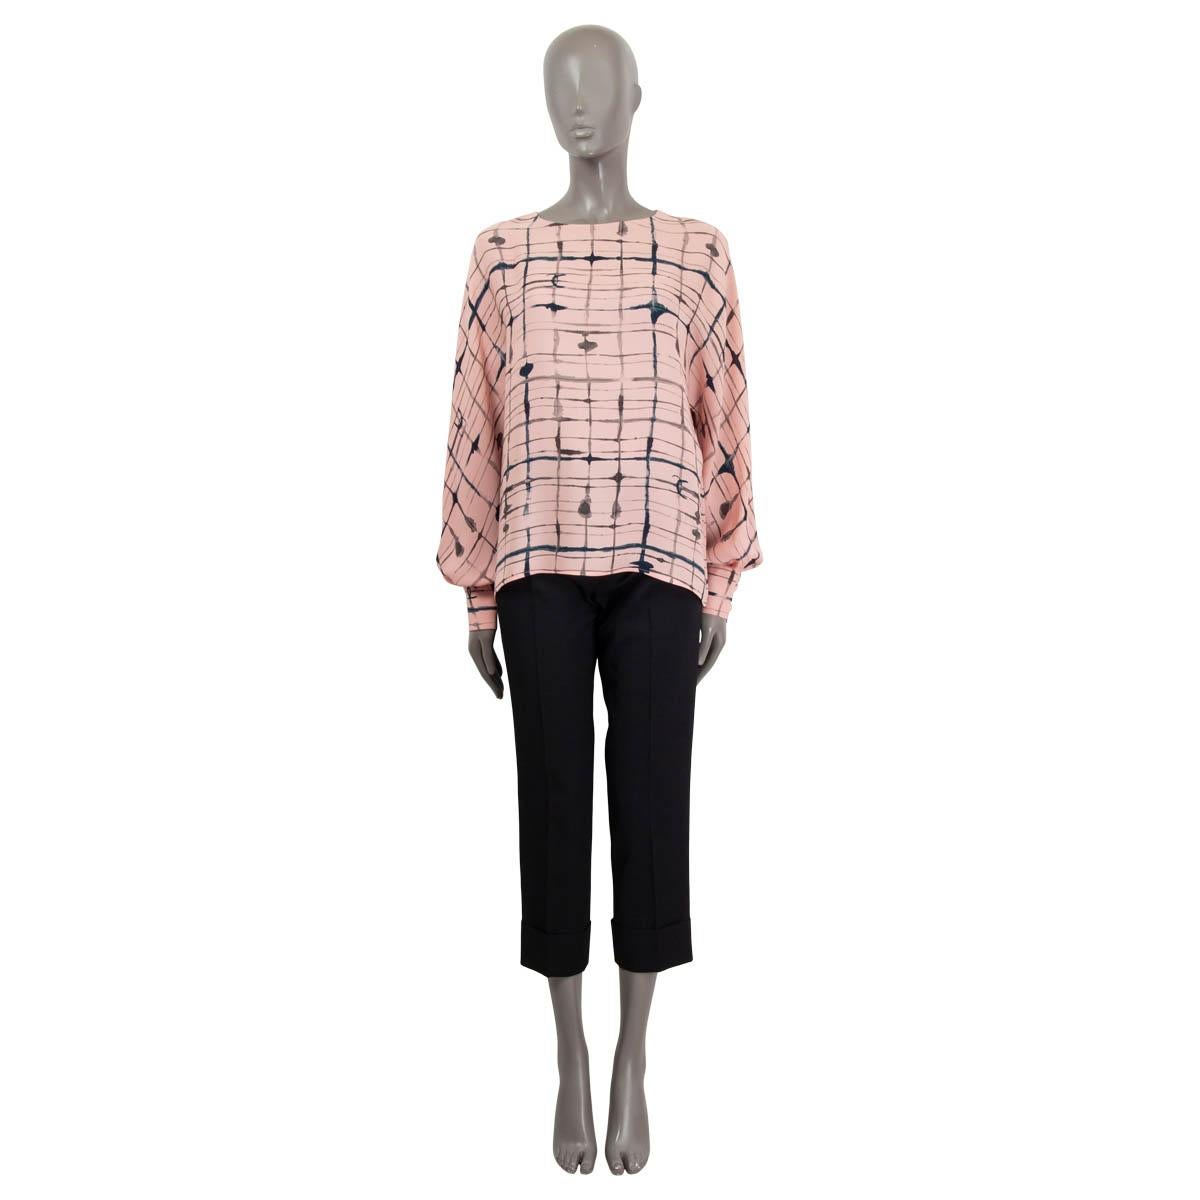 100% authentic CChanel 2021 oversized printed blouse in light pink, navy blue and faded black silk (100%). Opens with four golden star embellished buttons on the back. The design features wide raglan sleeves, is unlined and comes with buttoned